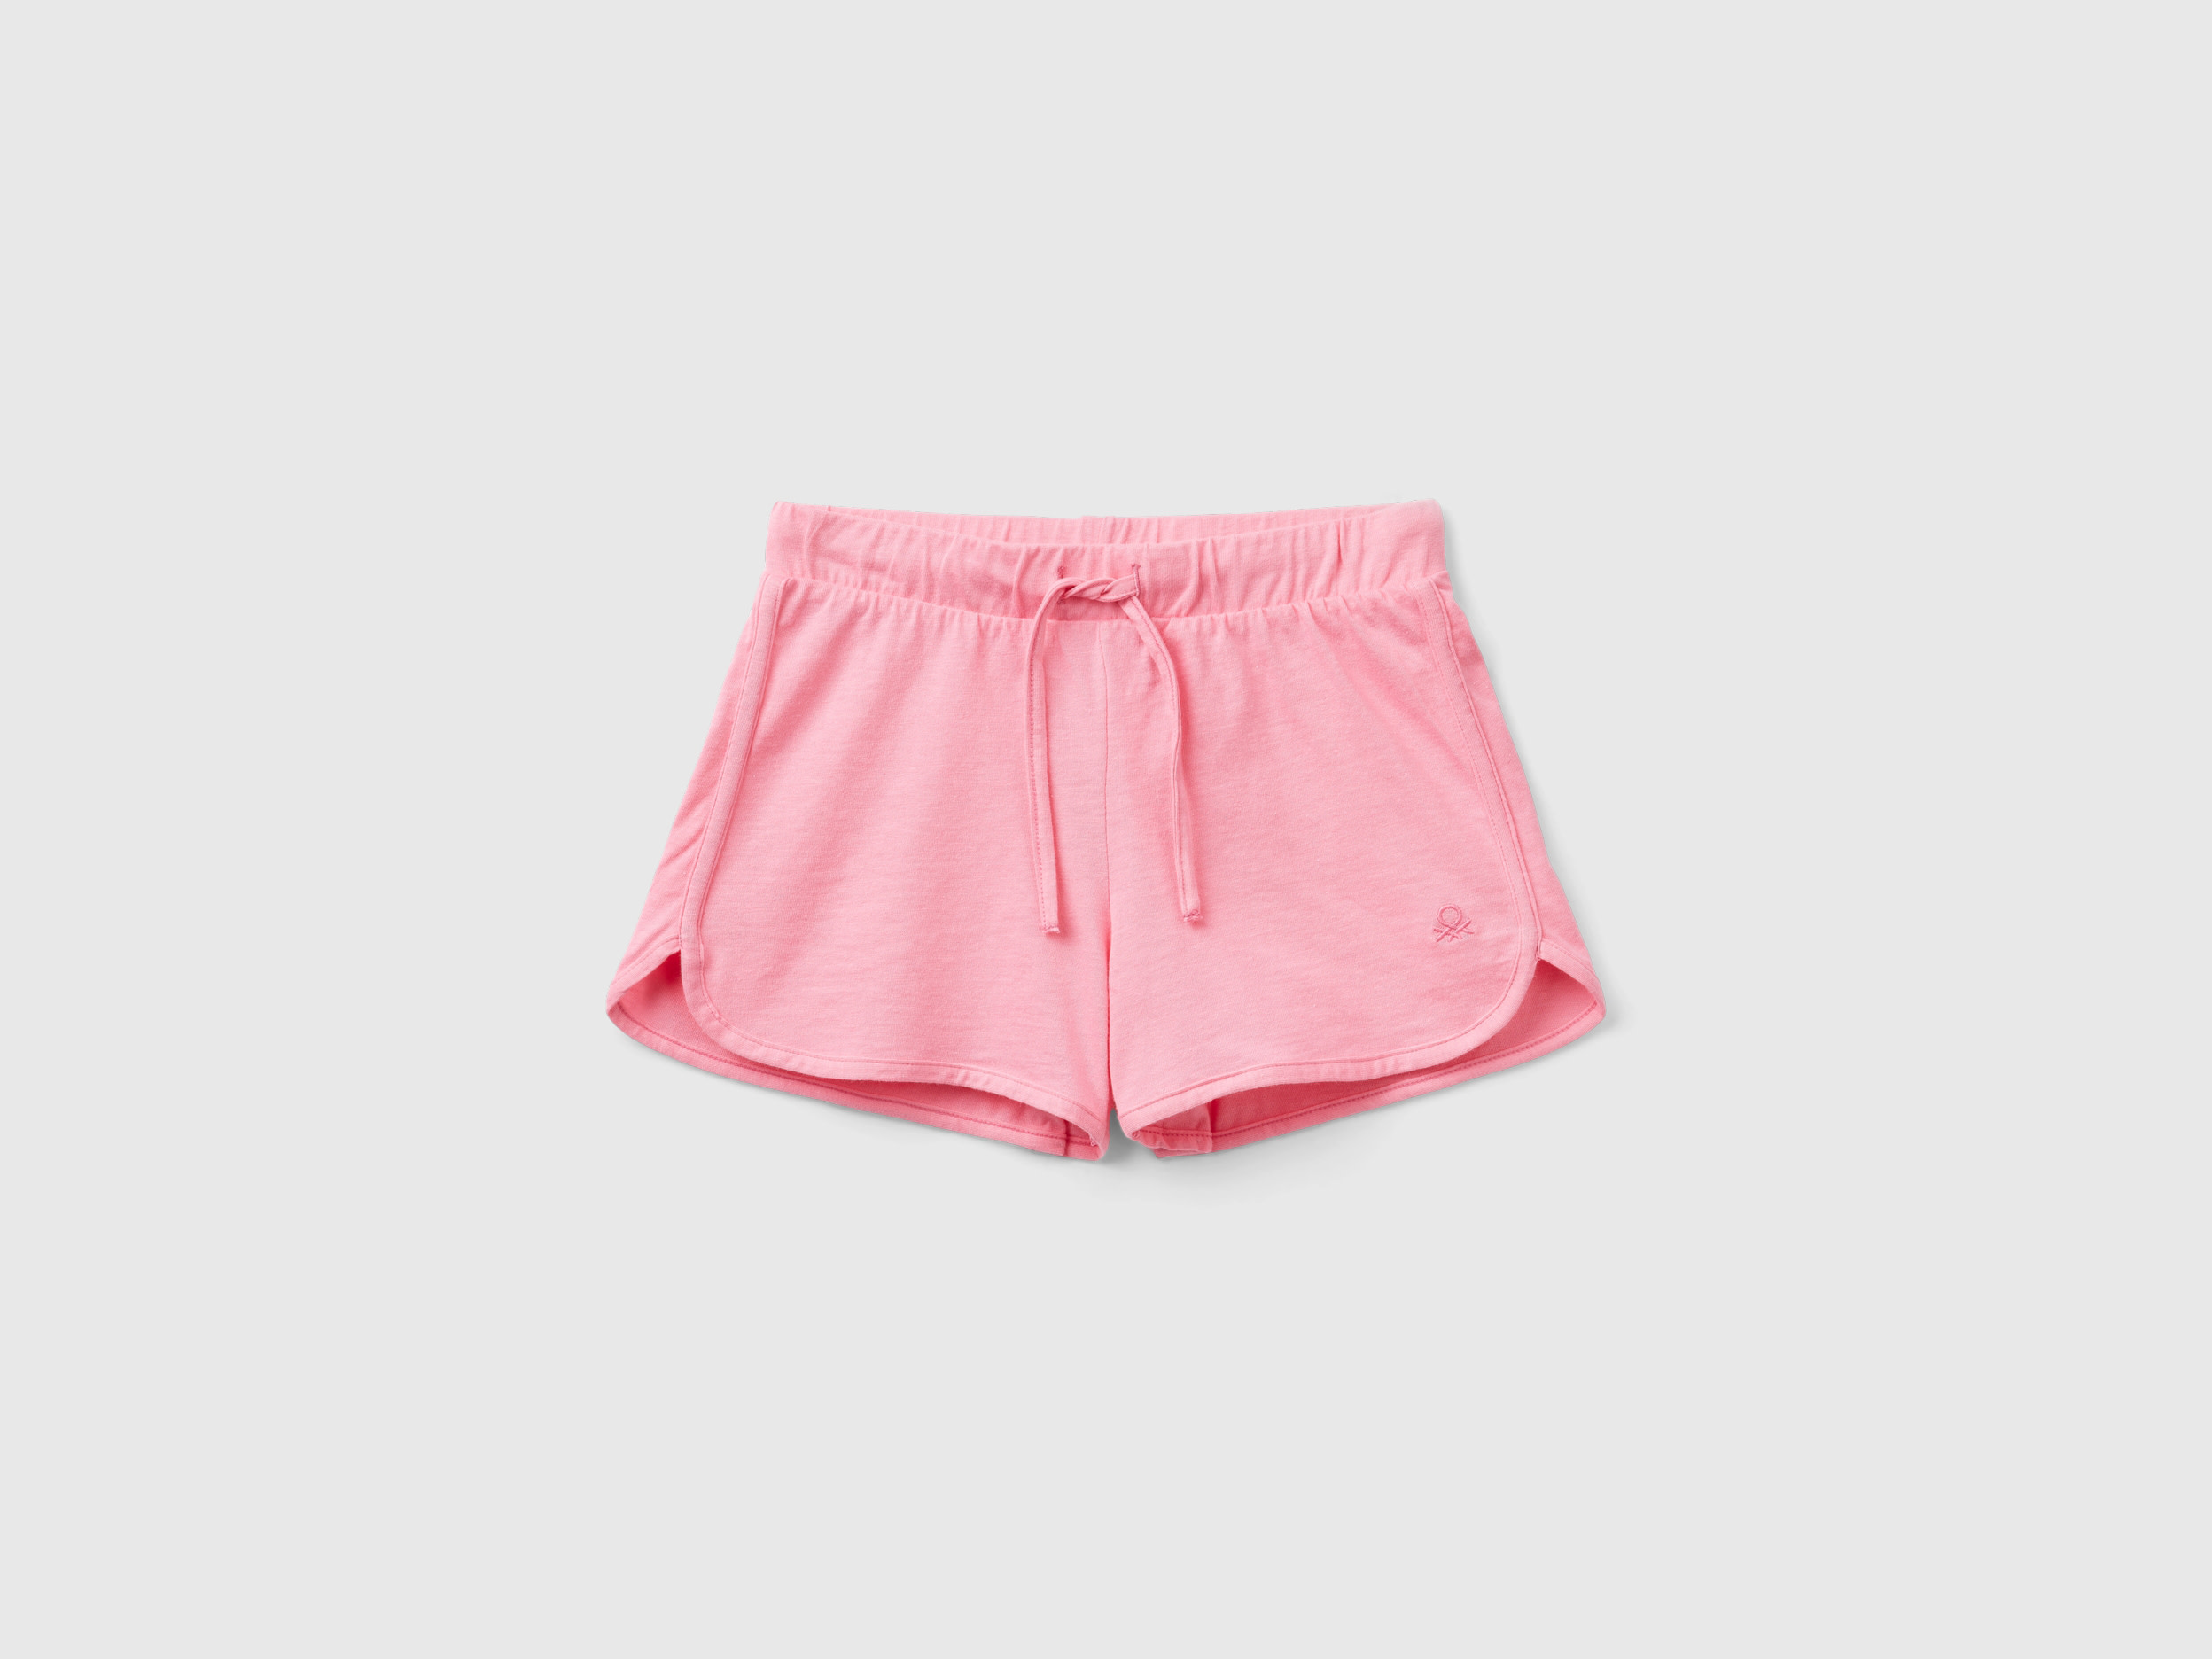 Image of Benetton, Runner Style Shorts In Organic Cotton, size L, Pink, Kids